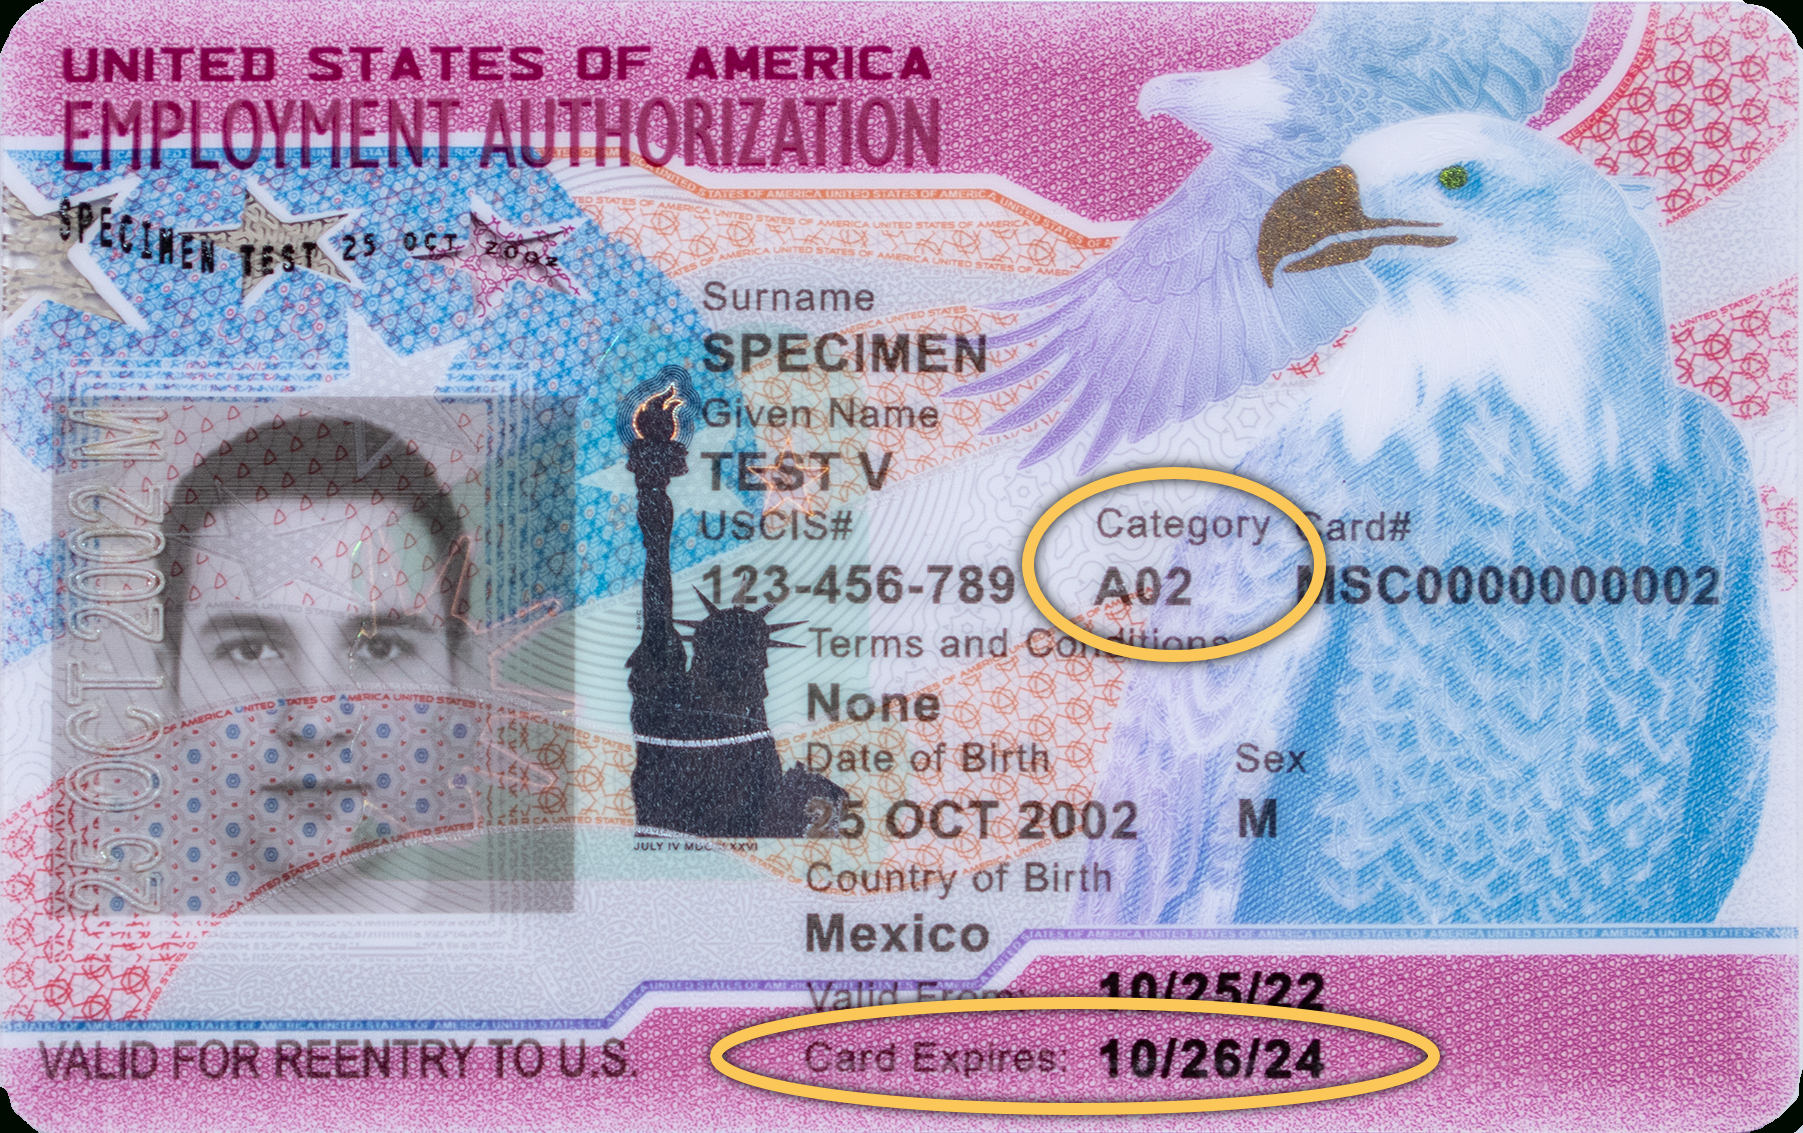 5.0 Automatic Extensions Of Employment Authorization And/Or intended for What is USCIS I-9 Form